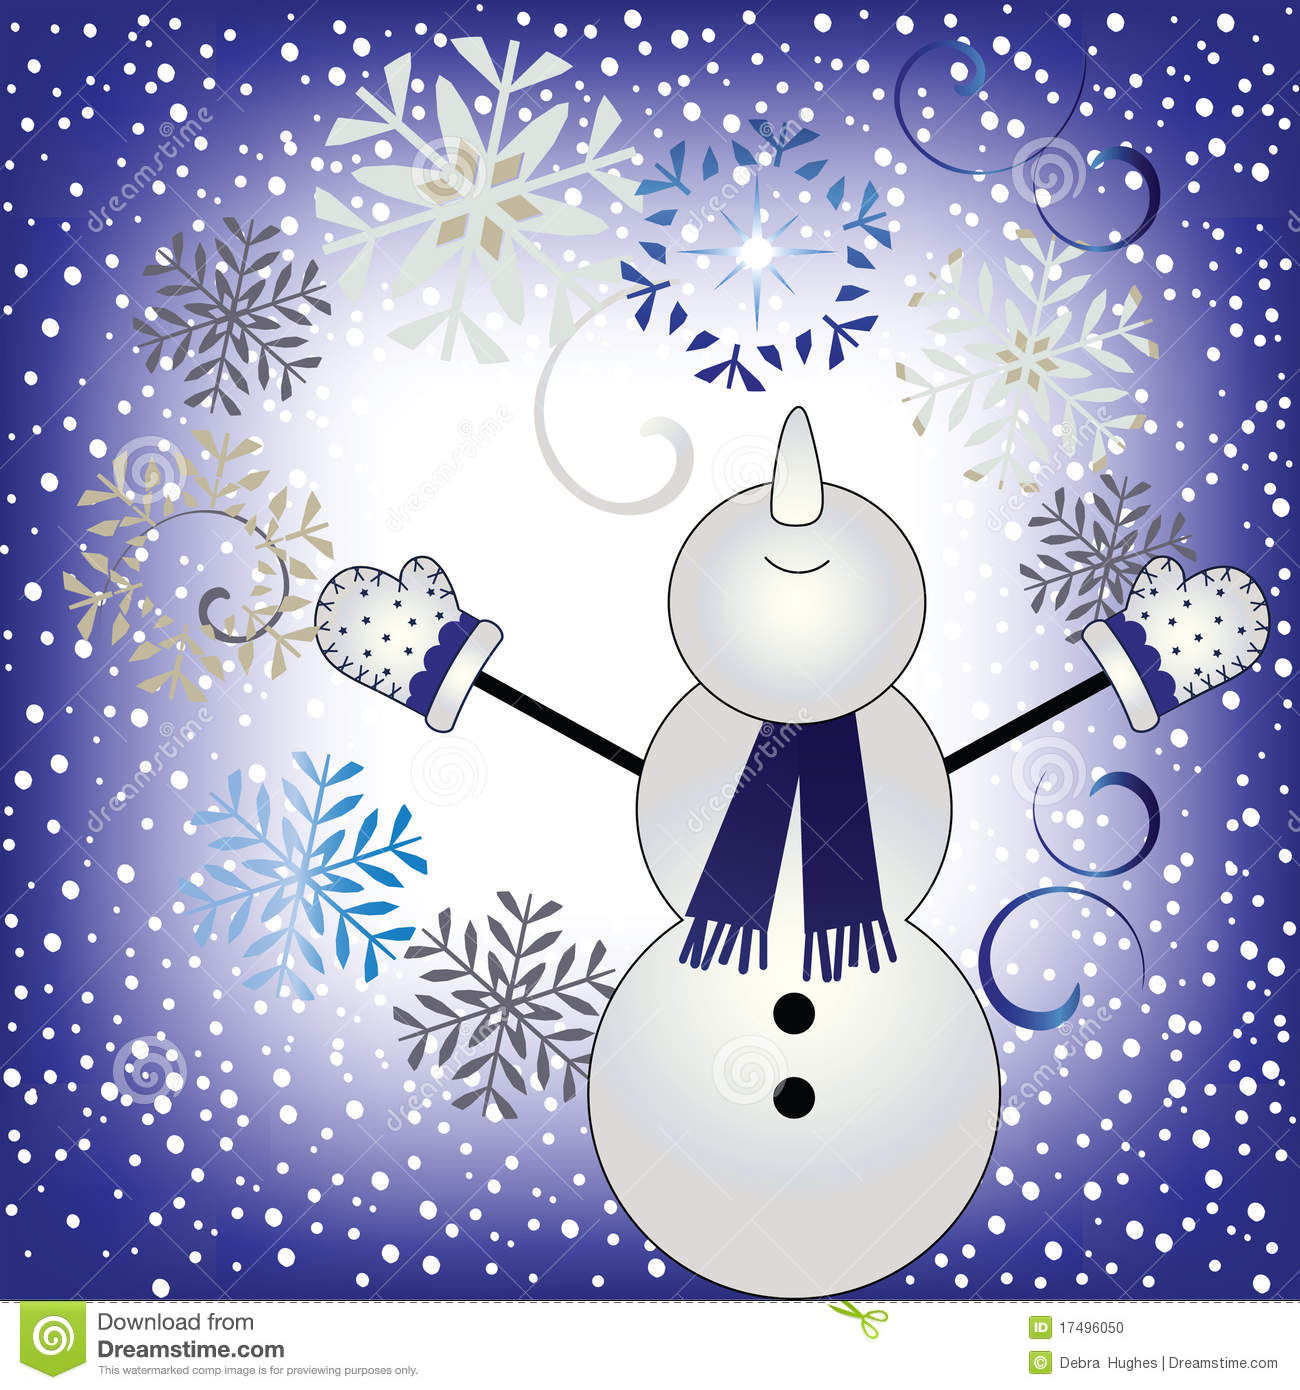 Let It Snow   Happy Snowman In Snowfall Stock Photo   Image  17496050